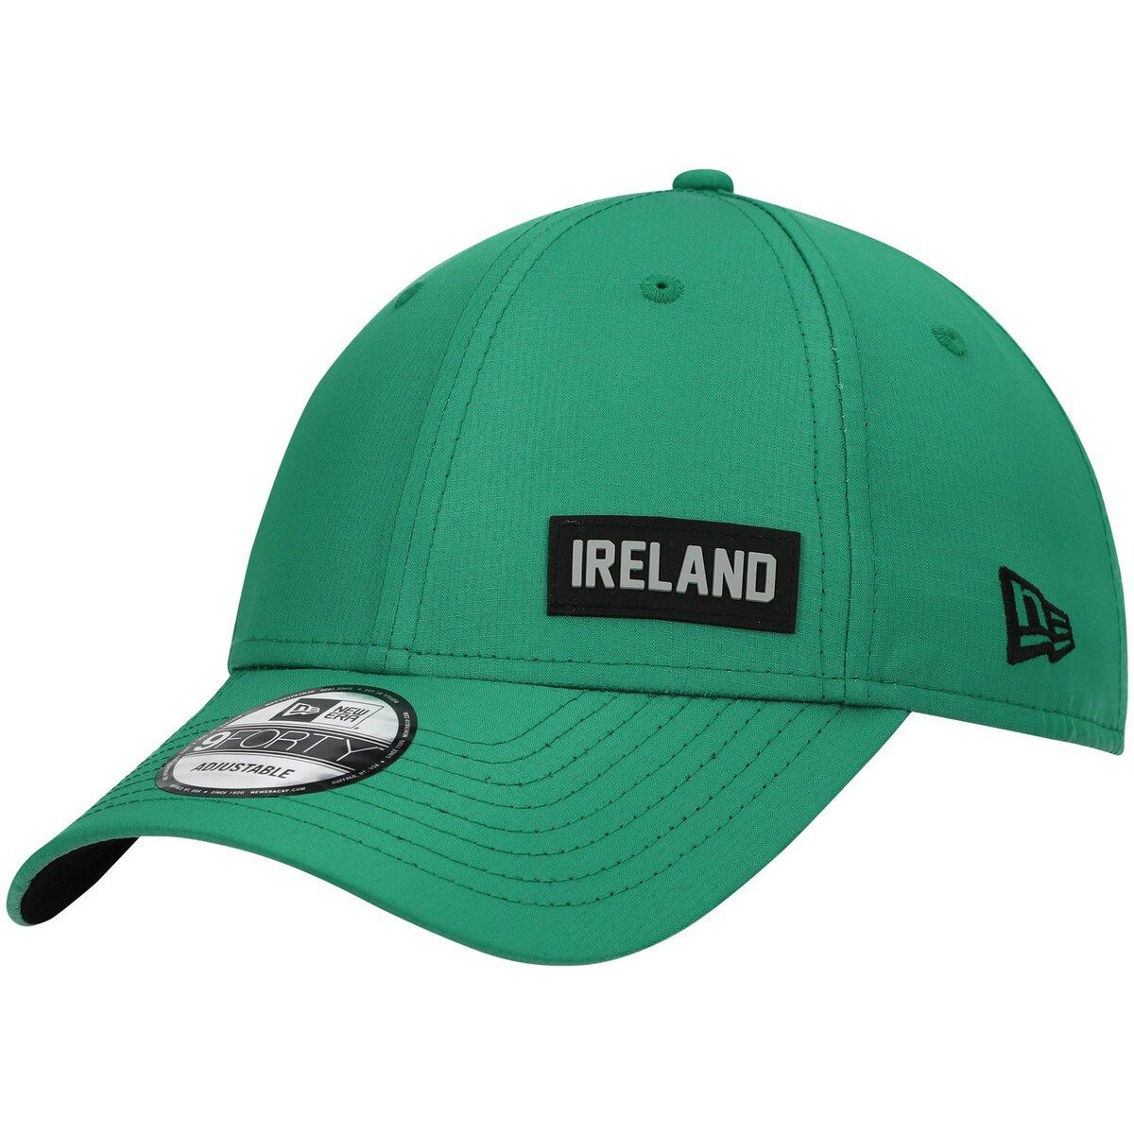 New Era Men's Green Ireland National Team Ripstop Flawless 9FORTY Adjustable Hat - Image 2 of 4